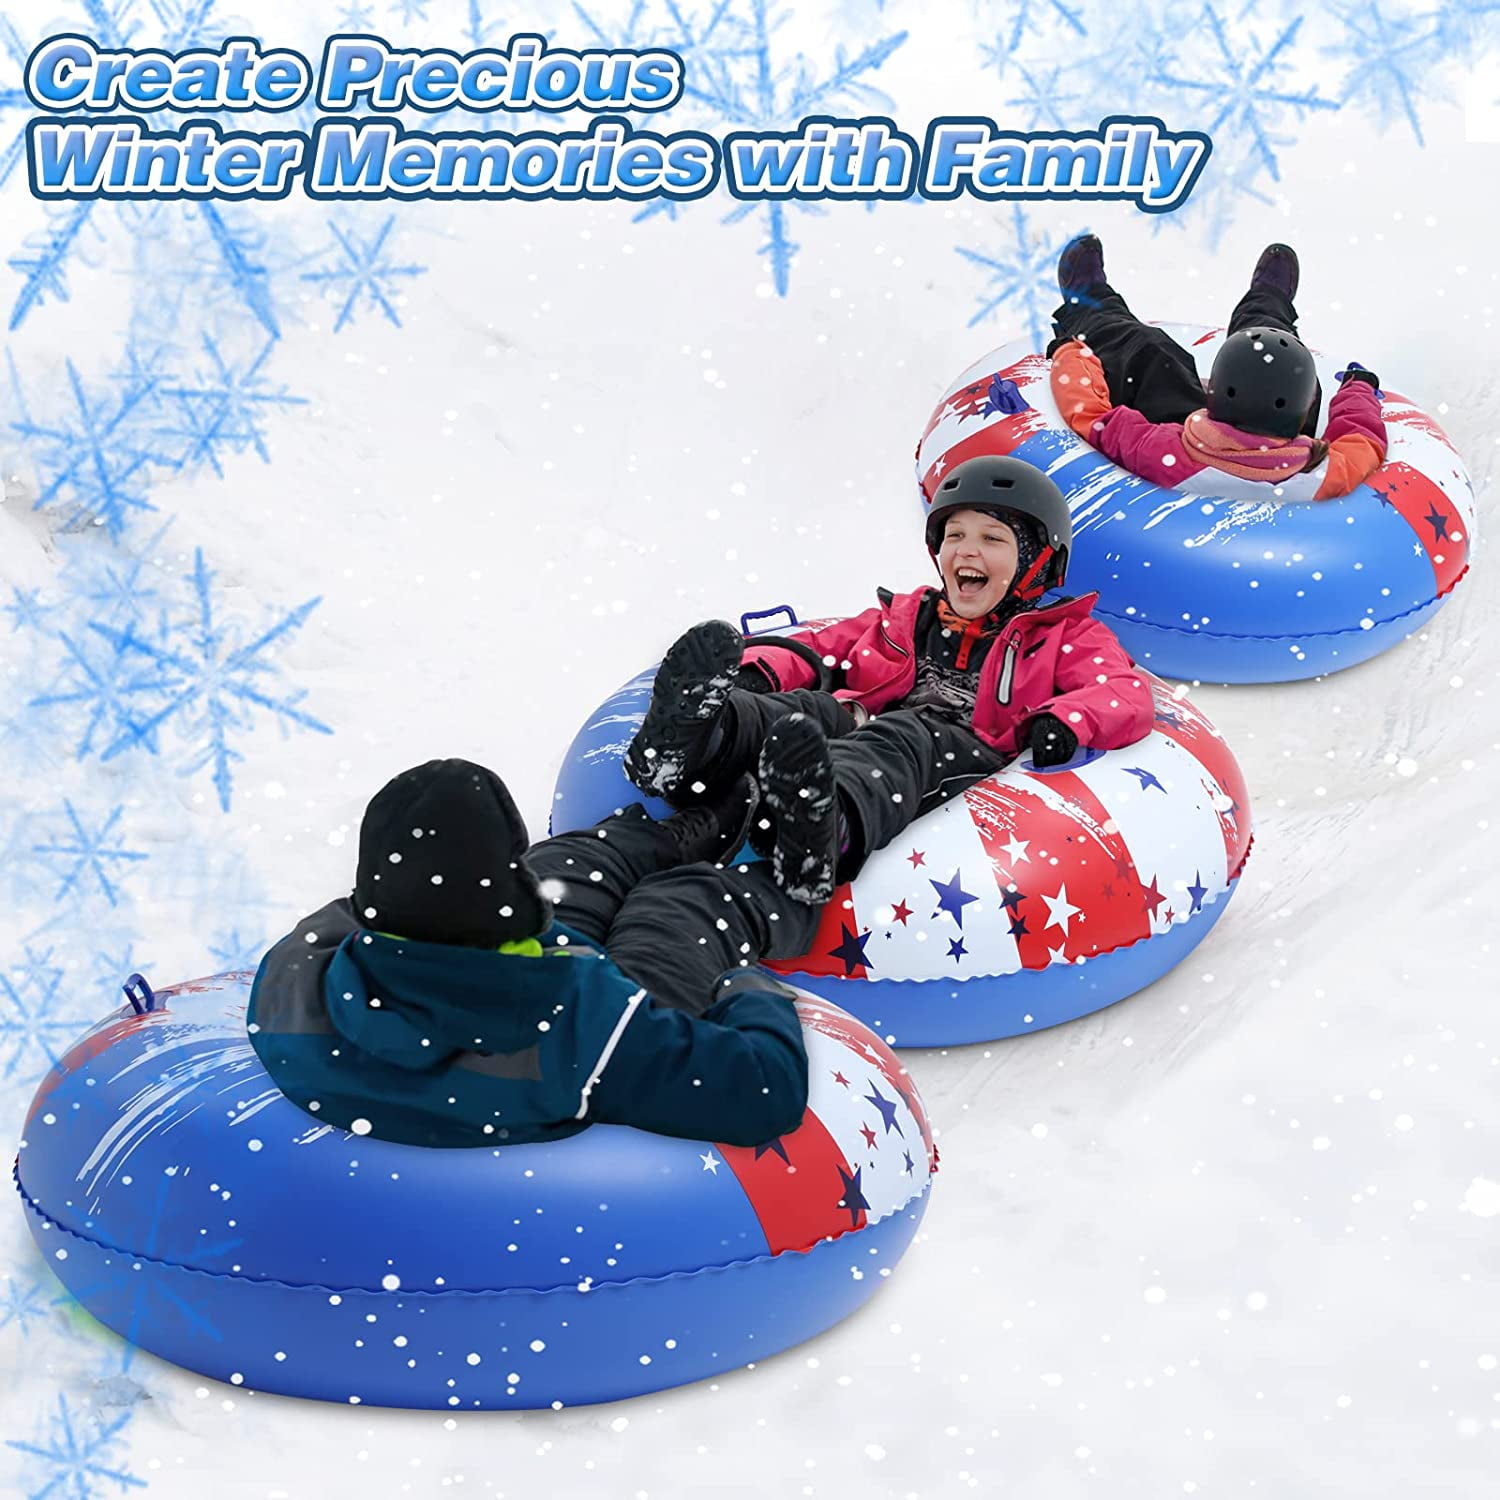 Heavy-Duty Snow Tube Combo for Sledding Great Inflatable Snow Tubes for Winter Fun and Family Activities Blue+Orange 2 Pcs 47” Inflatable Snow Tube 